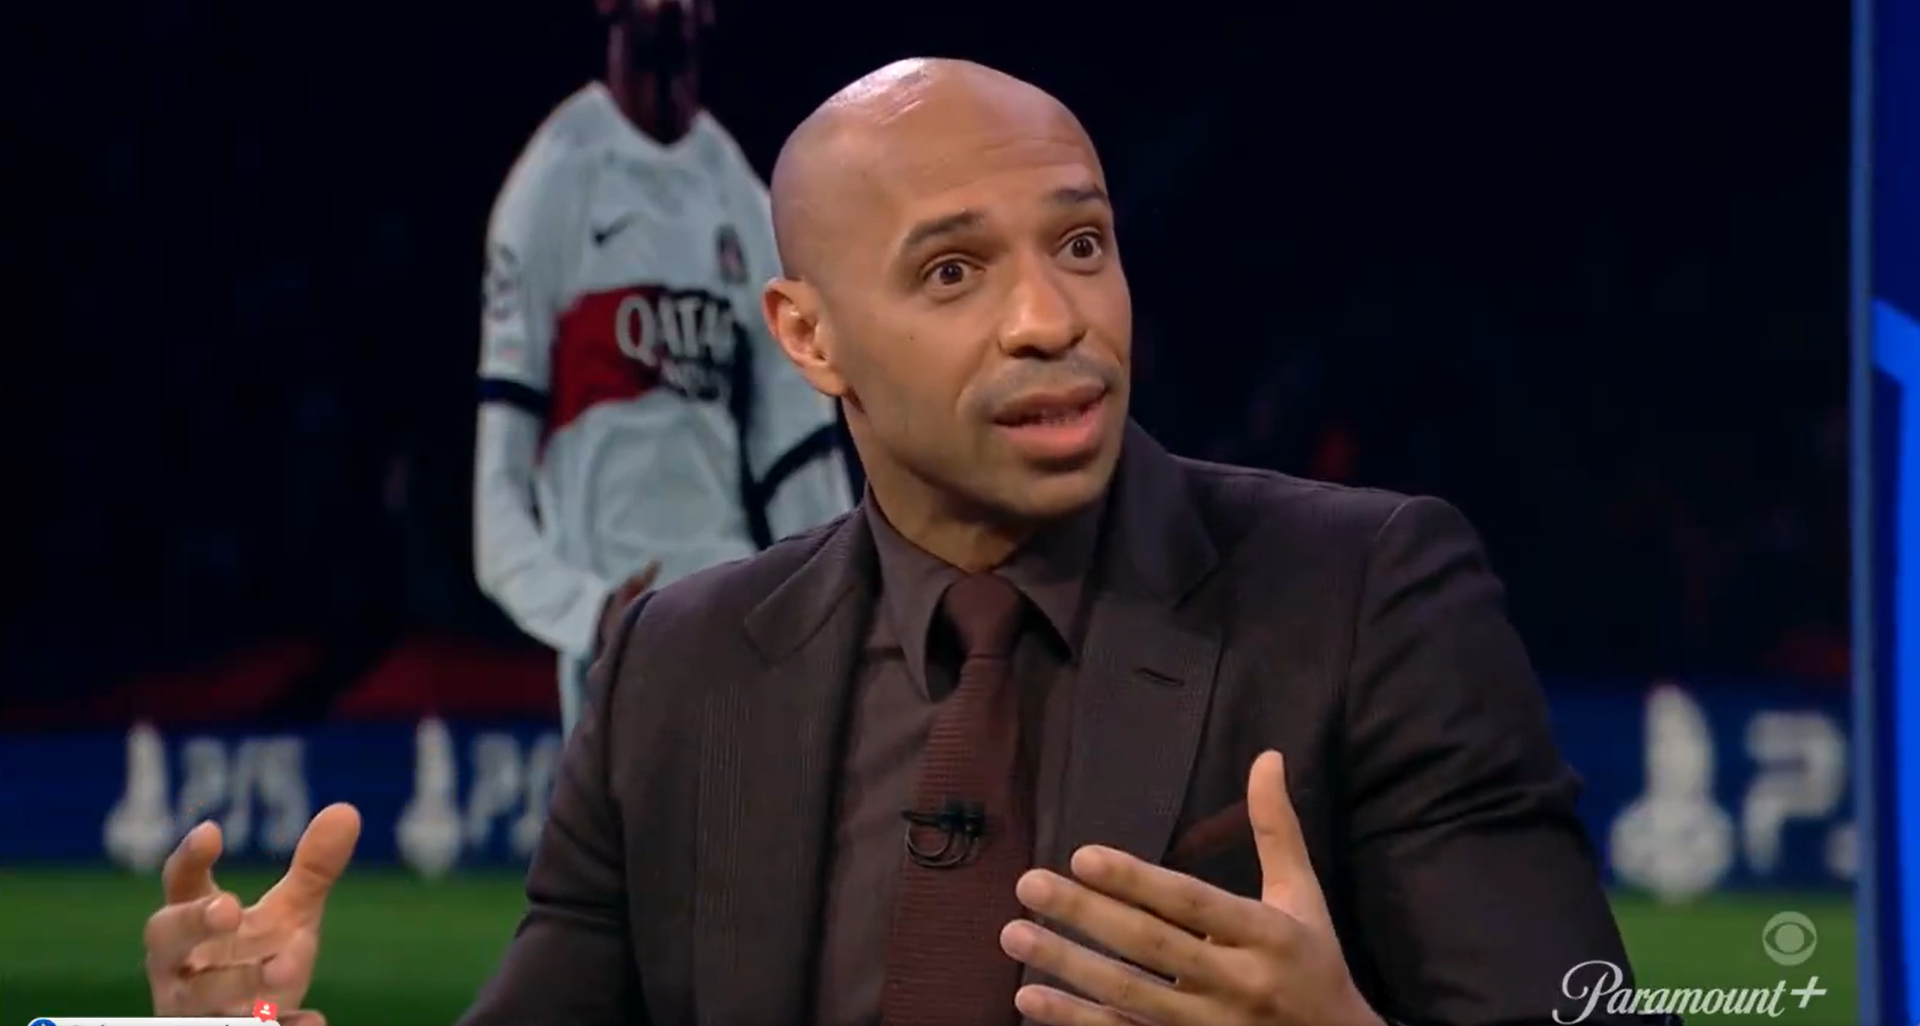 thierry henry blasts 'nervous' barcelona duo after champions league exit